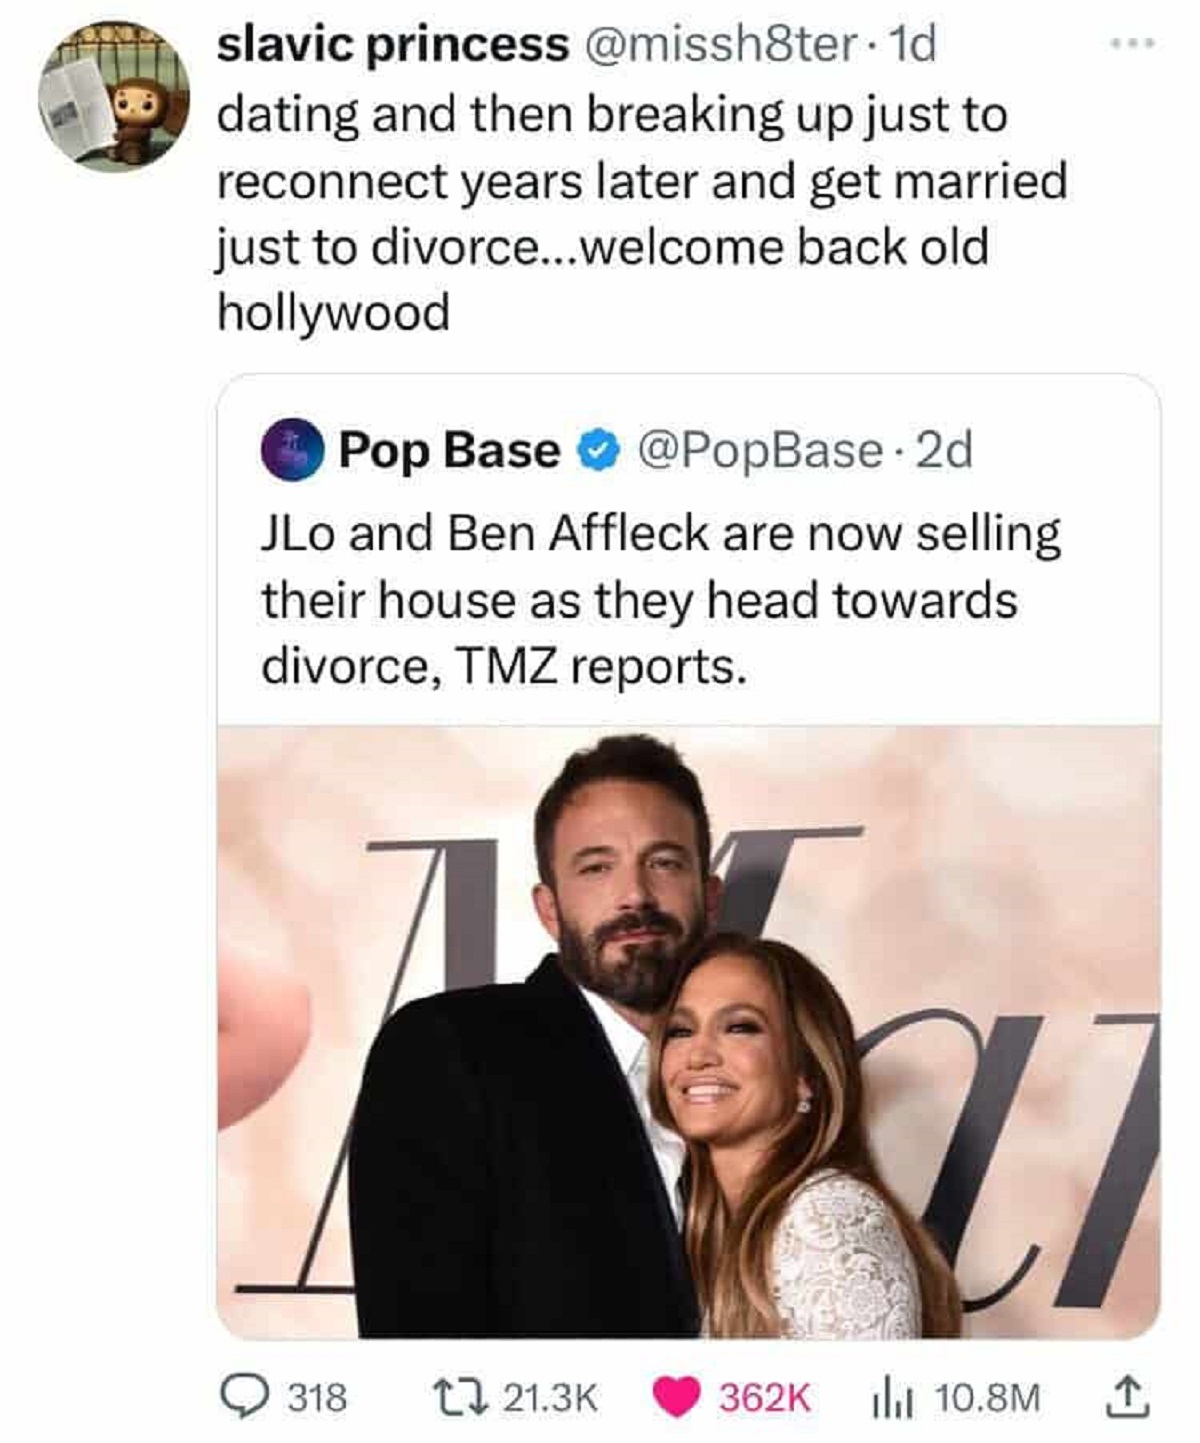 j lo and ben - slavic princess . 1d dating and then breaking up just to reconnect years later and get married just to divorce...welcome back old hollywood Pop Base 2d JLo and Ben Affleck are now selling their house as they head towards divorce, Tmz report